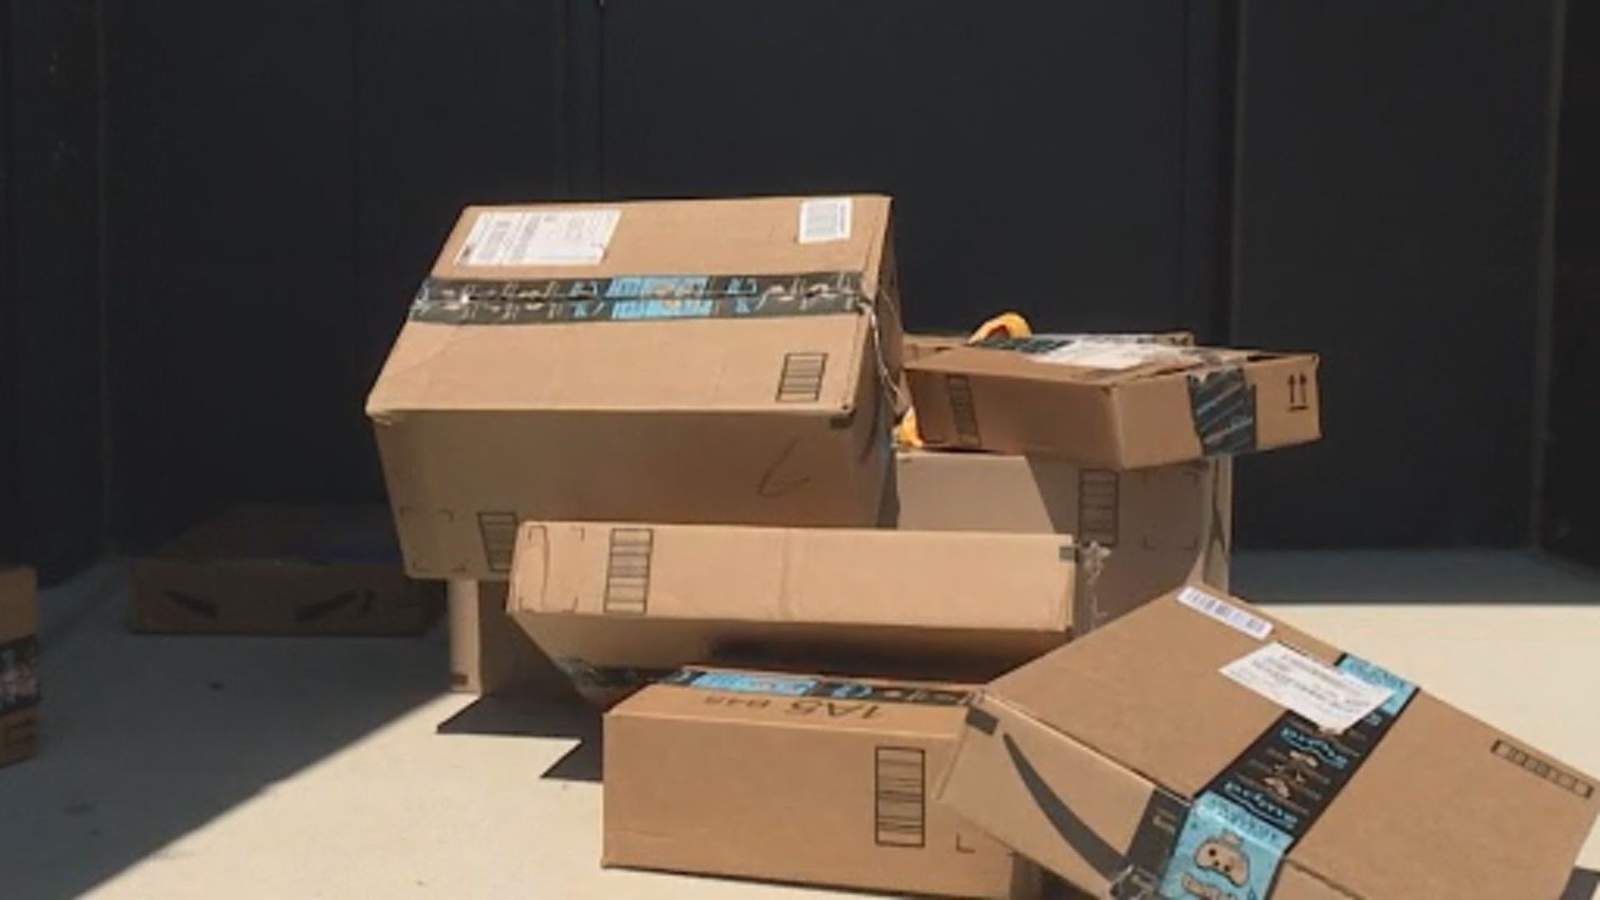 SCAM ALERT: Amazon sellers use your info, send packages you didn’t order to boost ratings